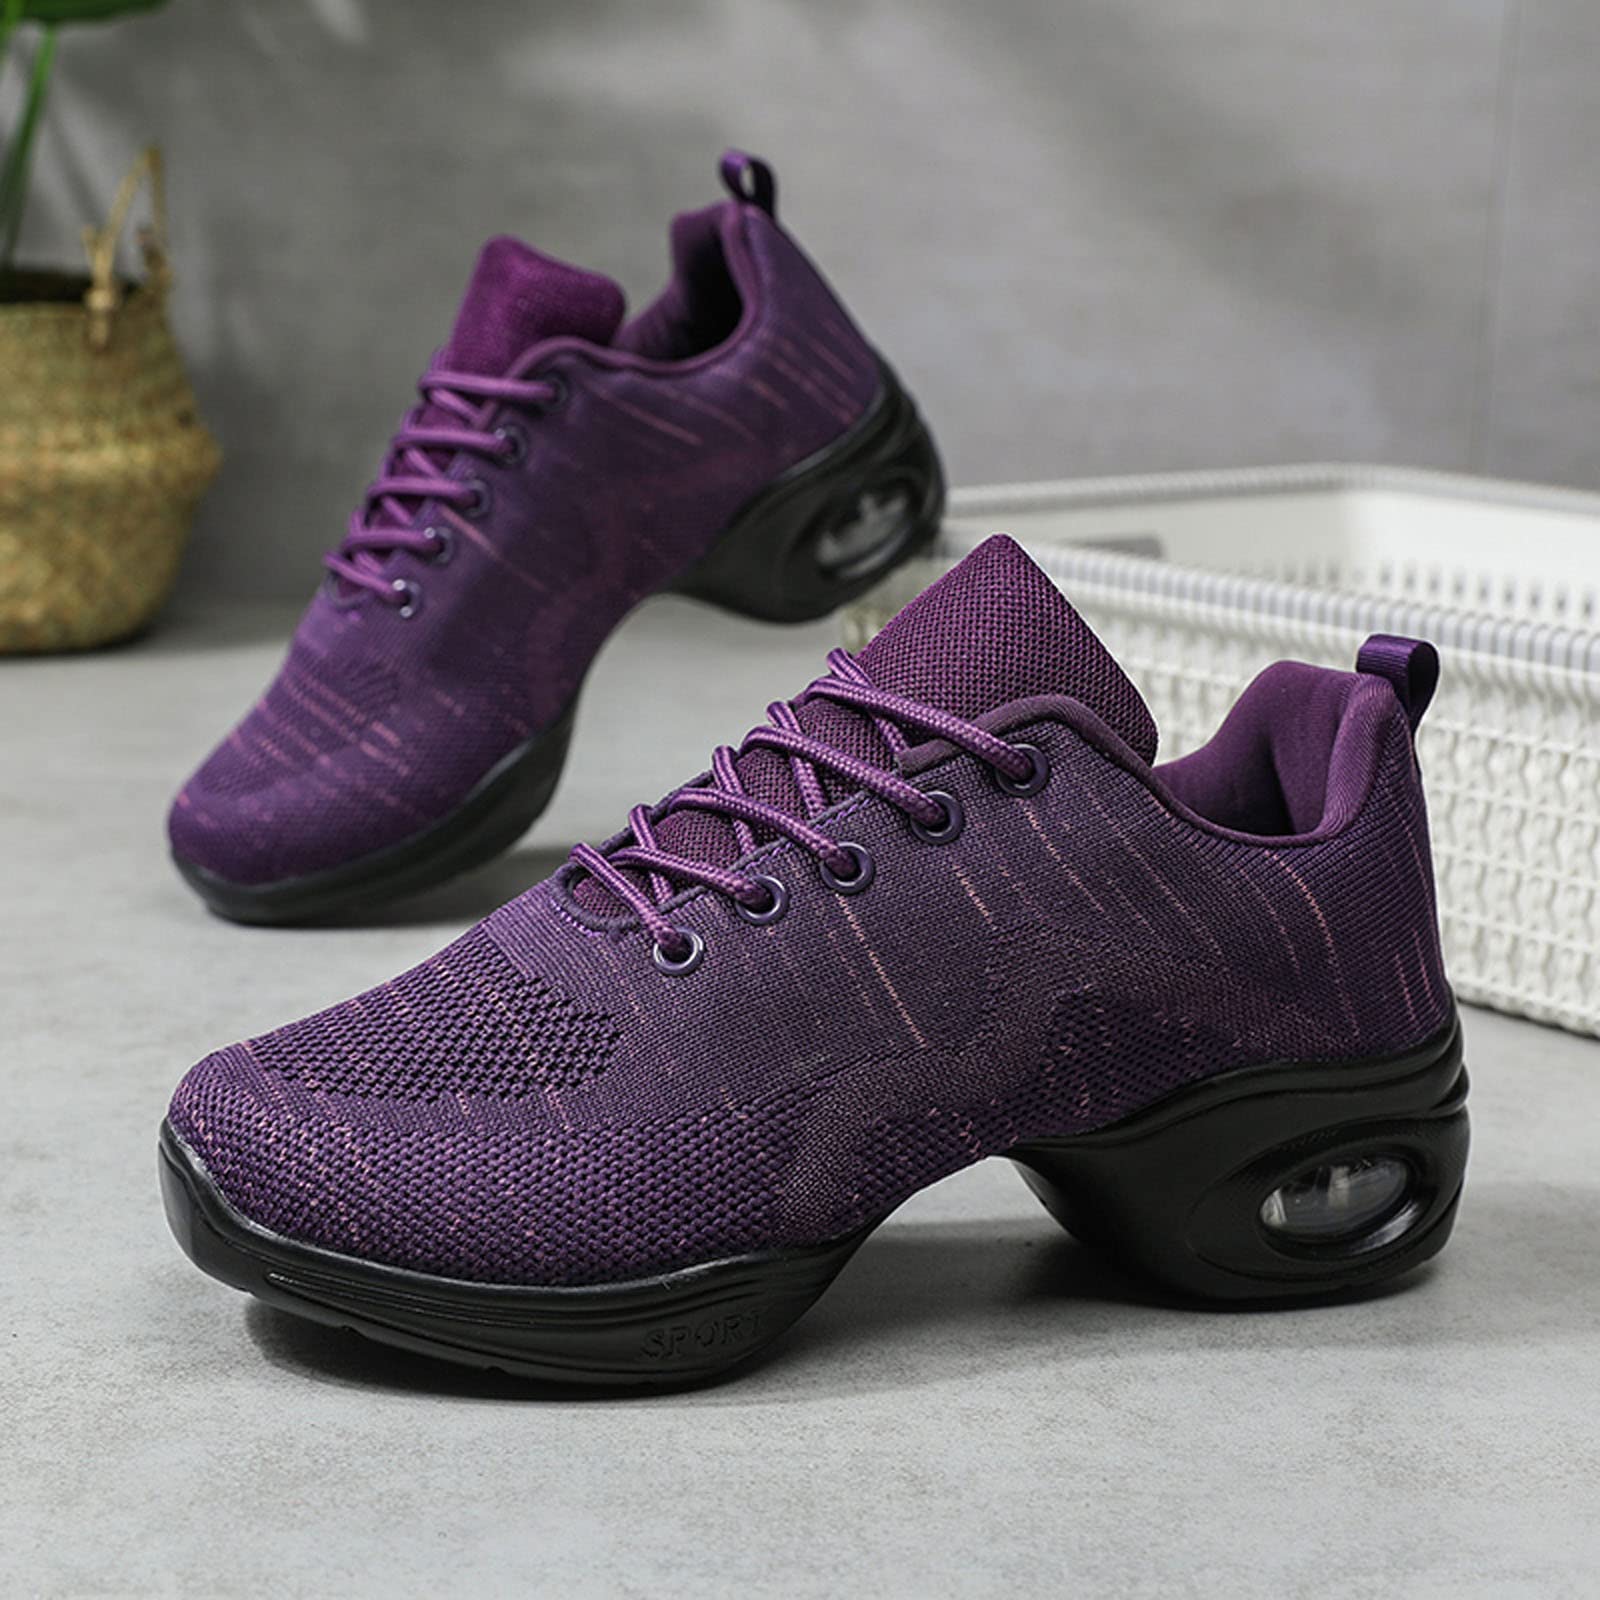 Girls Jazz Shoes Non Slip Modern Dance Sneakers Lace Up Thick Soled Walking Shoes Athletic Jazz Dance Sneakers Purple 39